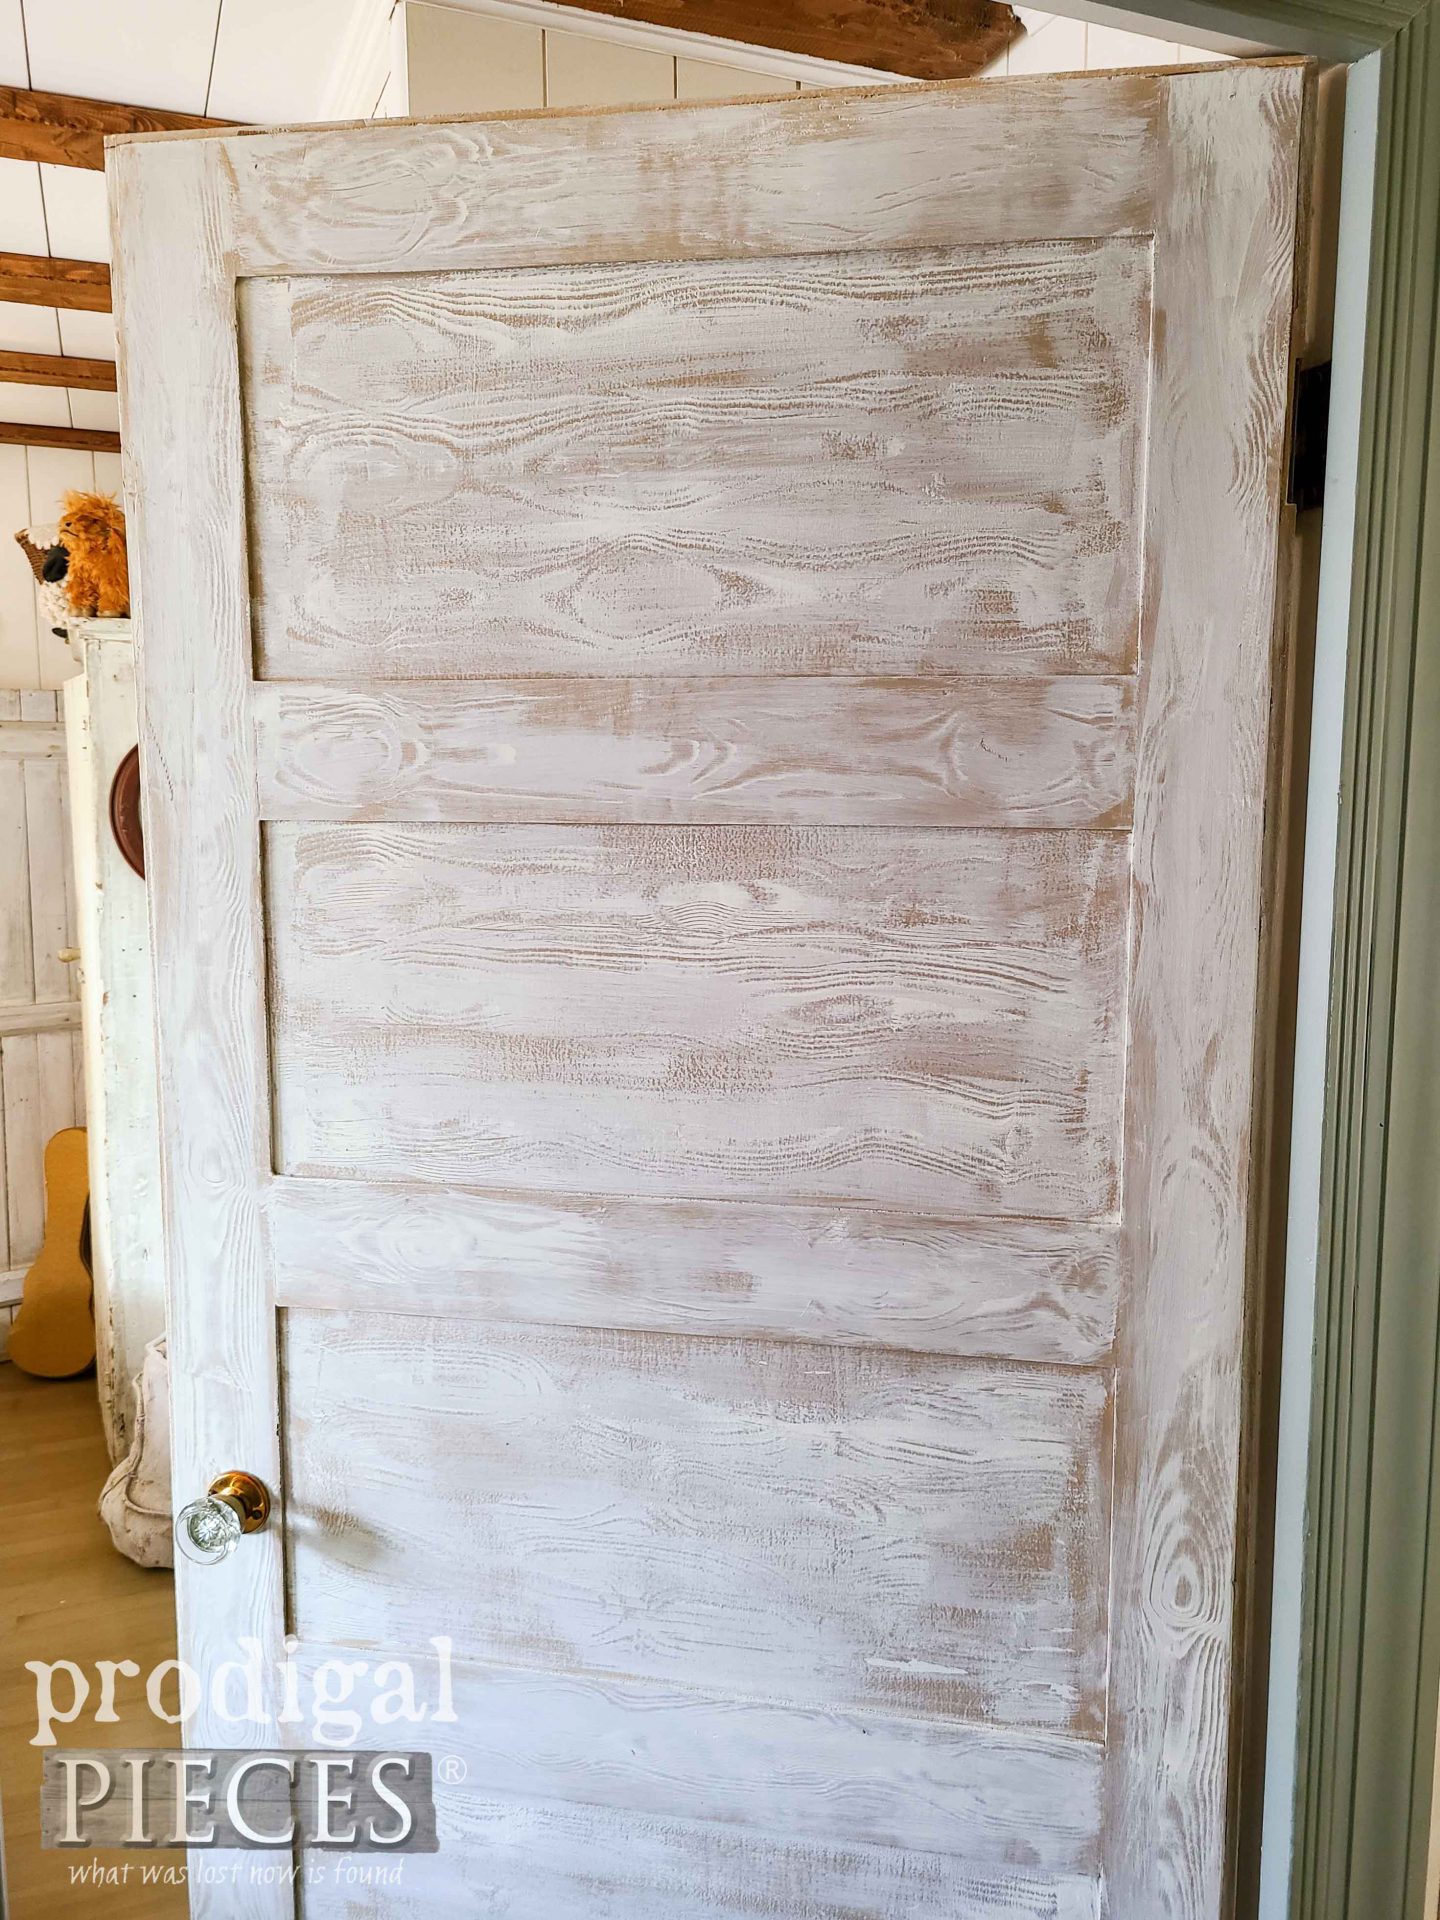 DIY Farmhouse Bedroom Hollow Core Door Makeover by Larissa of Prodigal Pieces | prodigalpieces.com #prodigalpieces #budget #farmhouse #diy